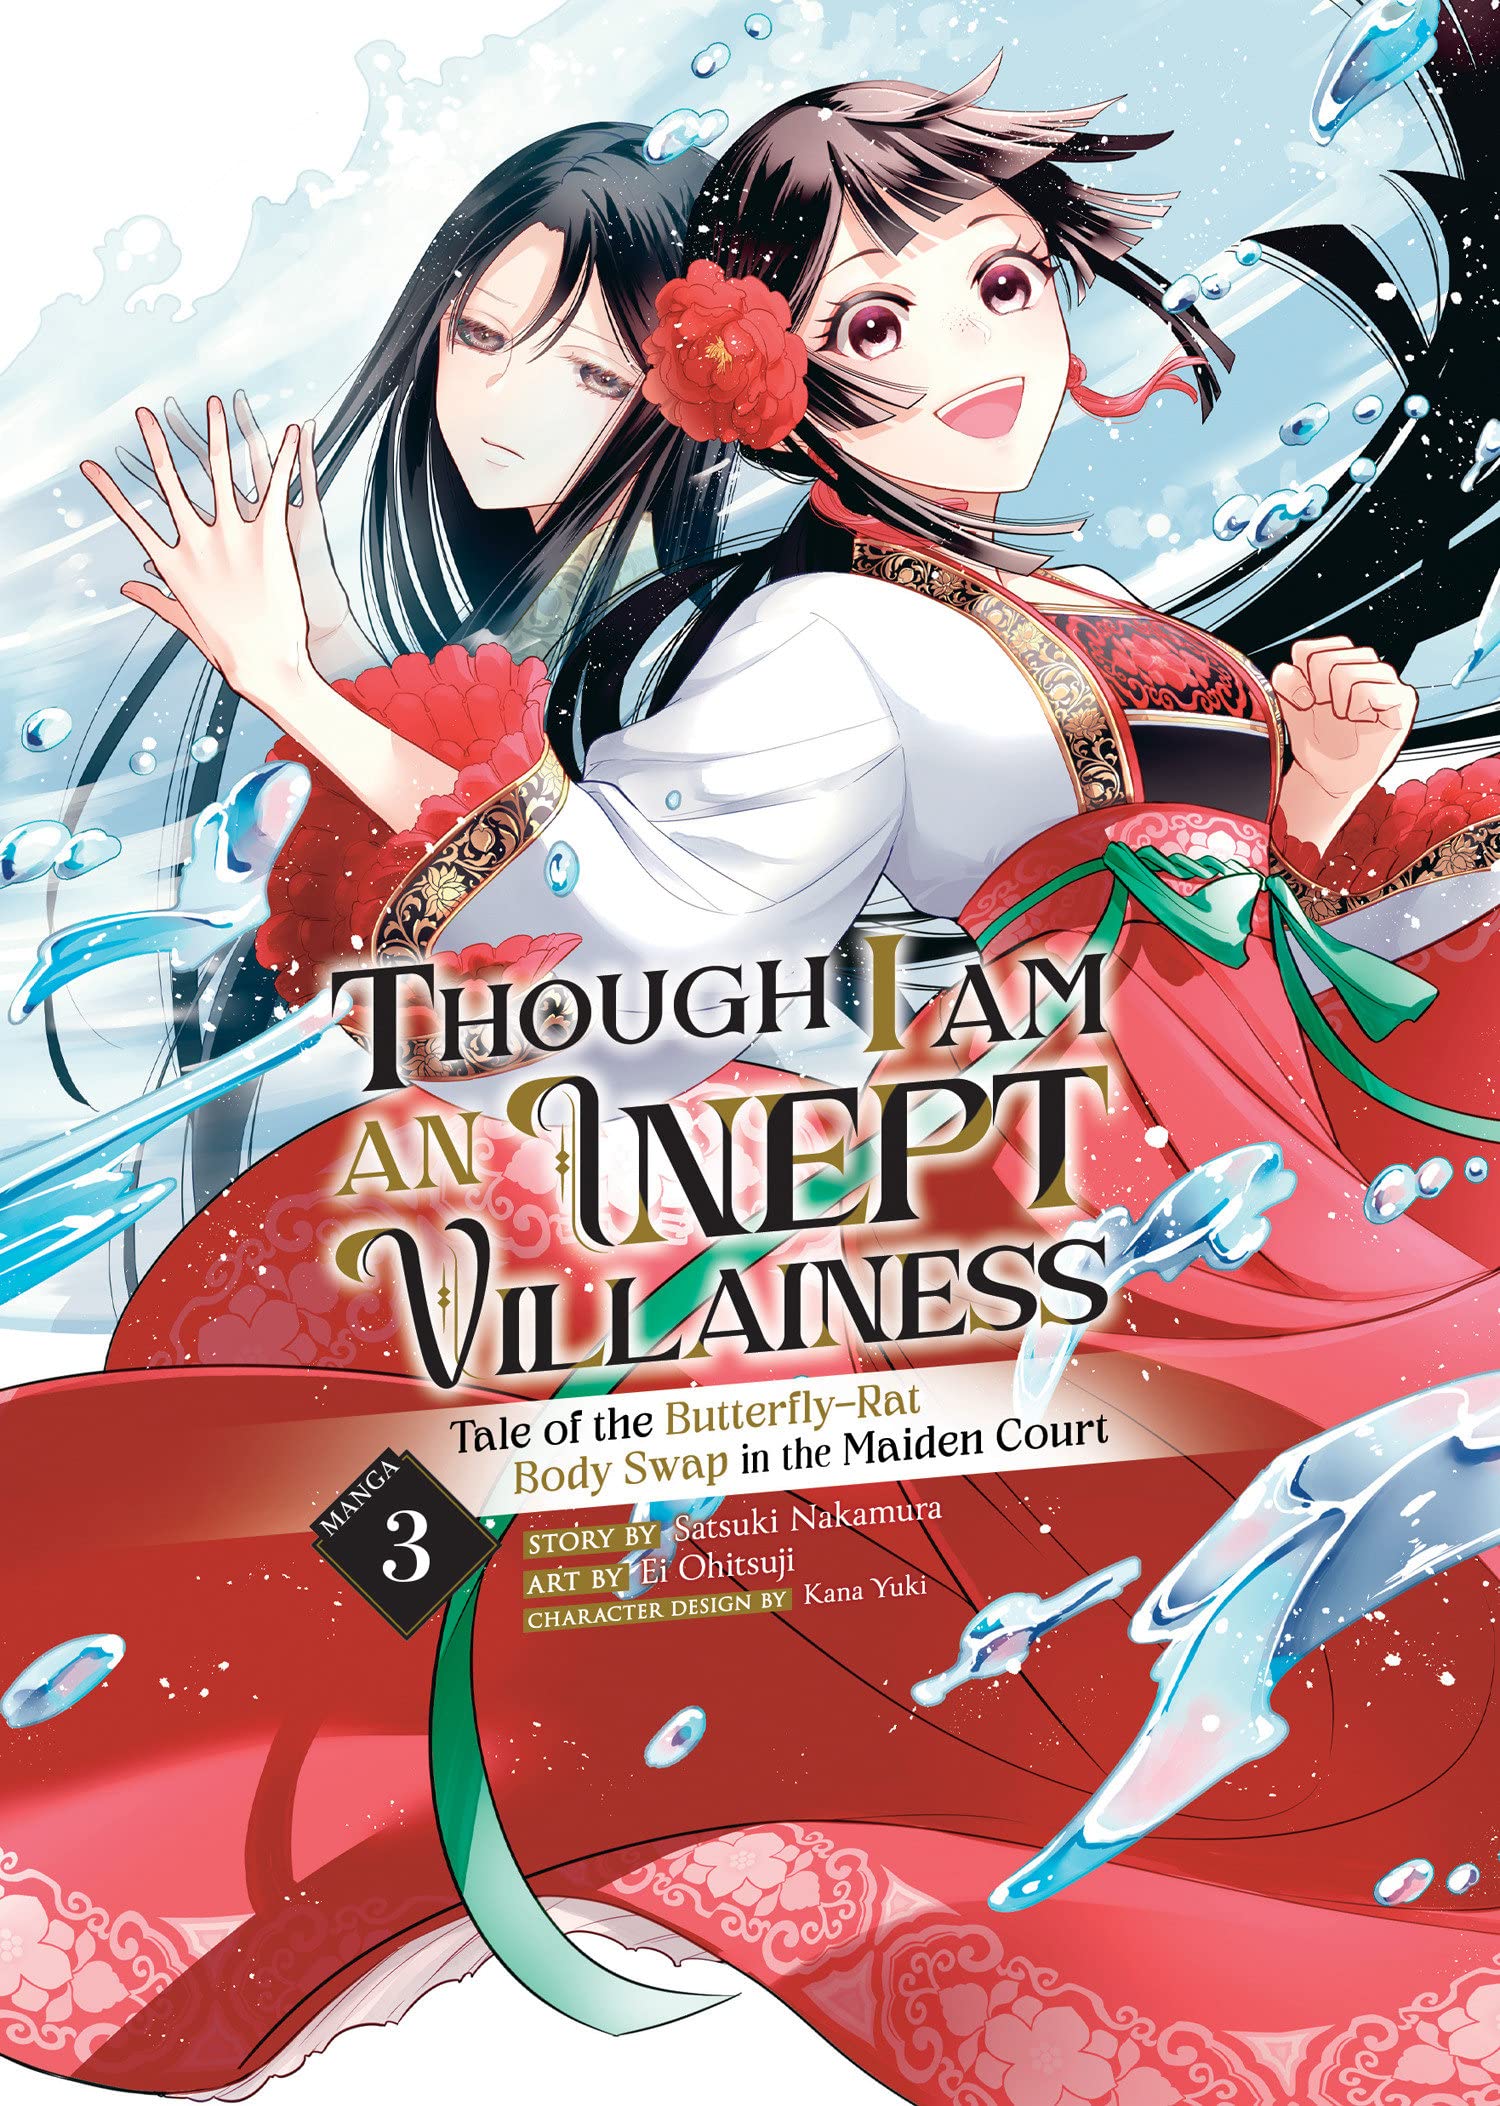 Though I Am an Inept Villainess: Tale of the Butterfly-Rat Body Swap in the Maiden Court (Manga) Vol. 03